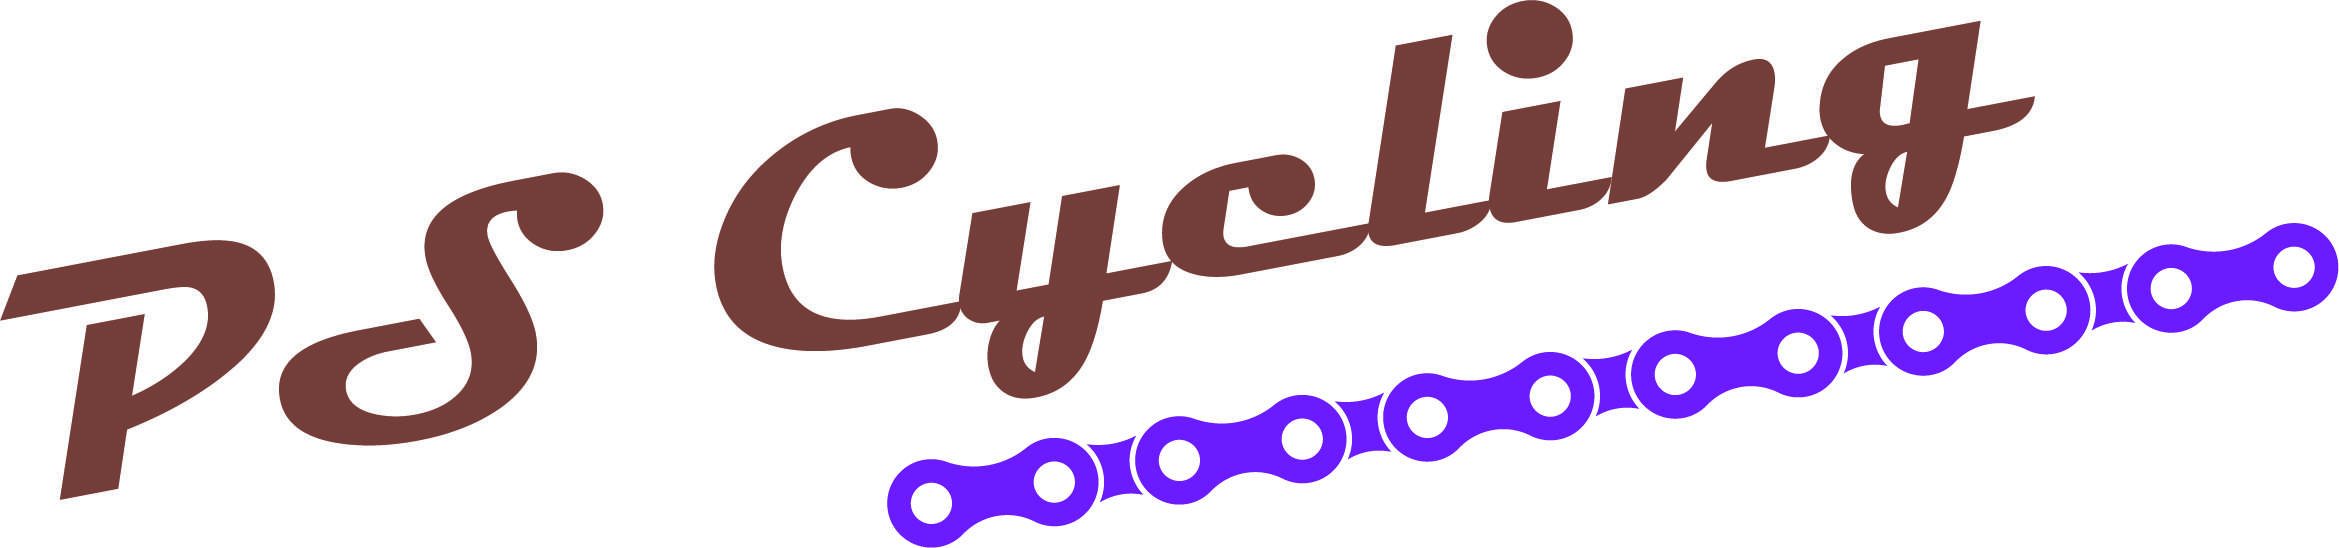 PS Cycling – Kreation eines Logos